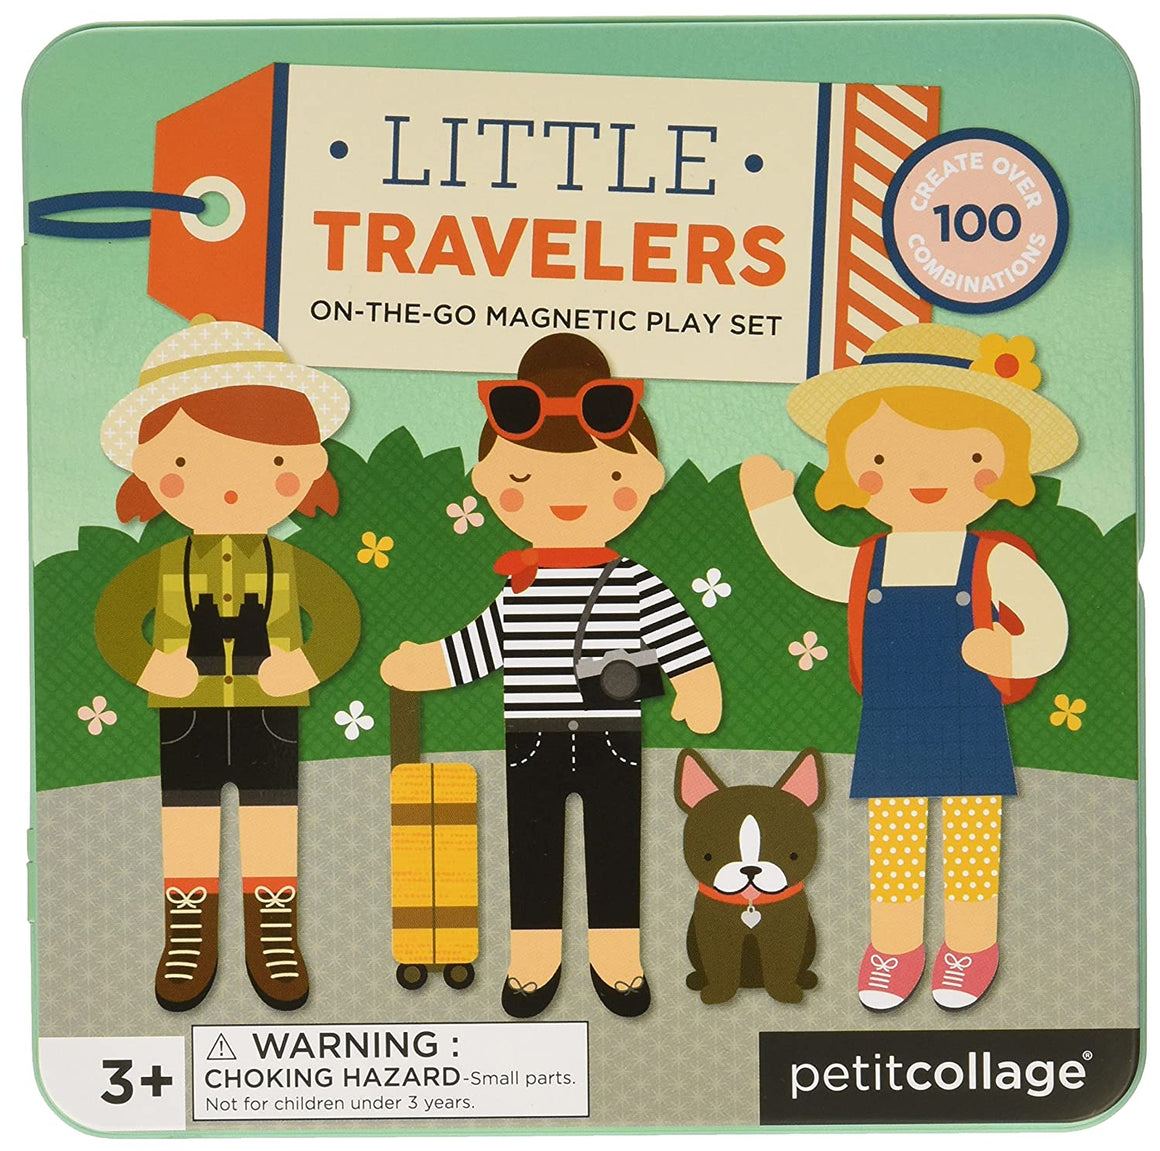 On The Go Magnetic Play Set - Little Travelers